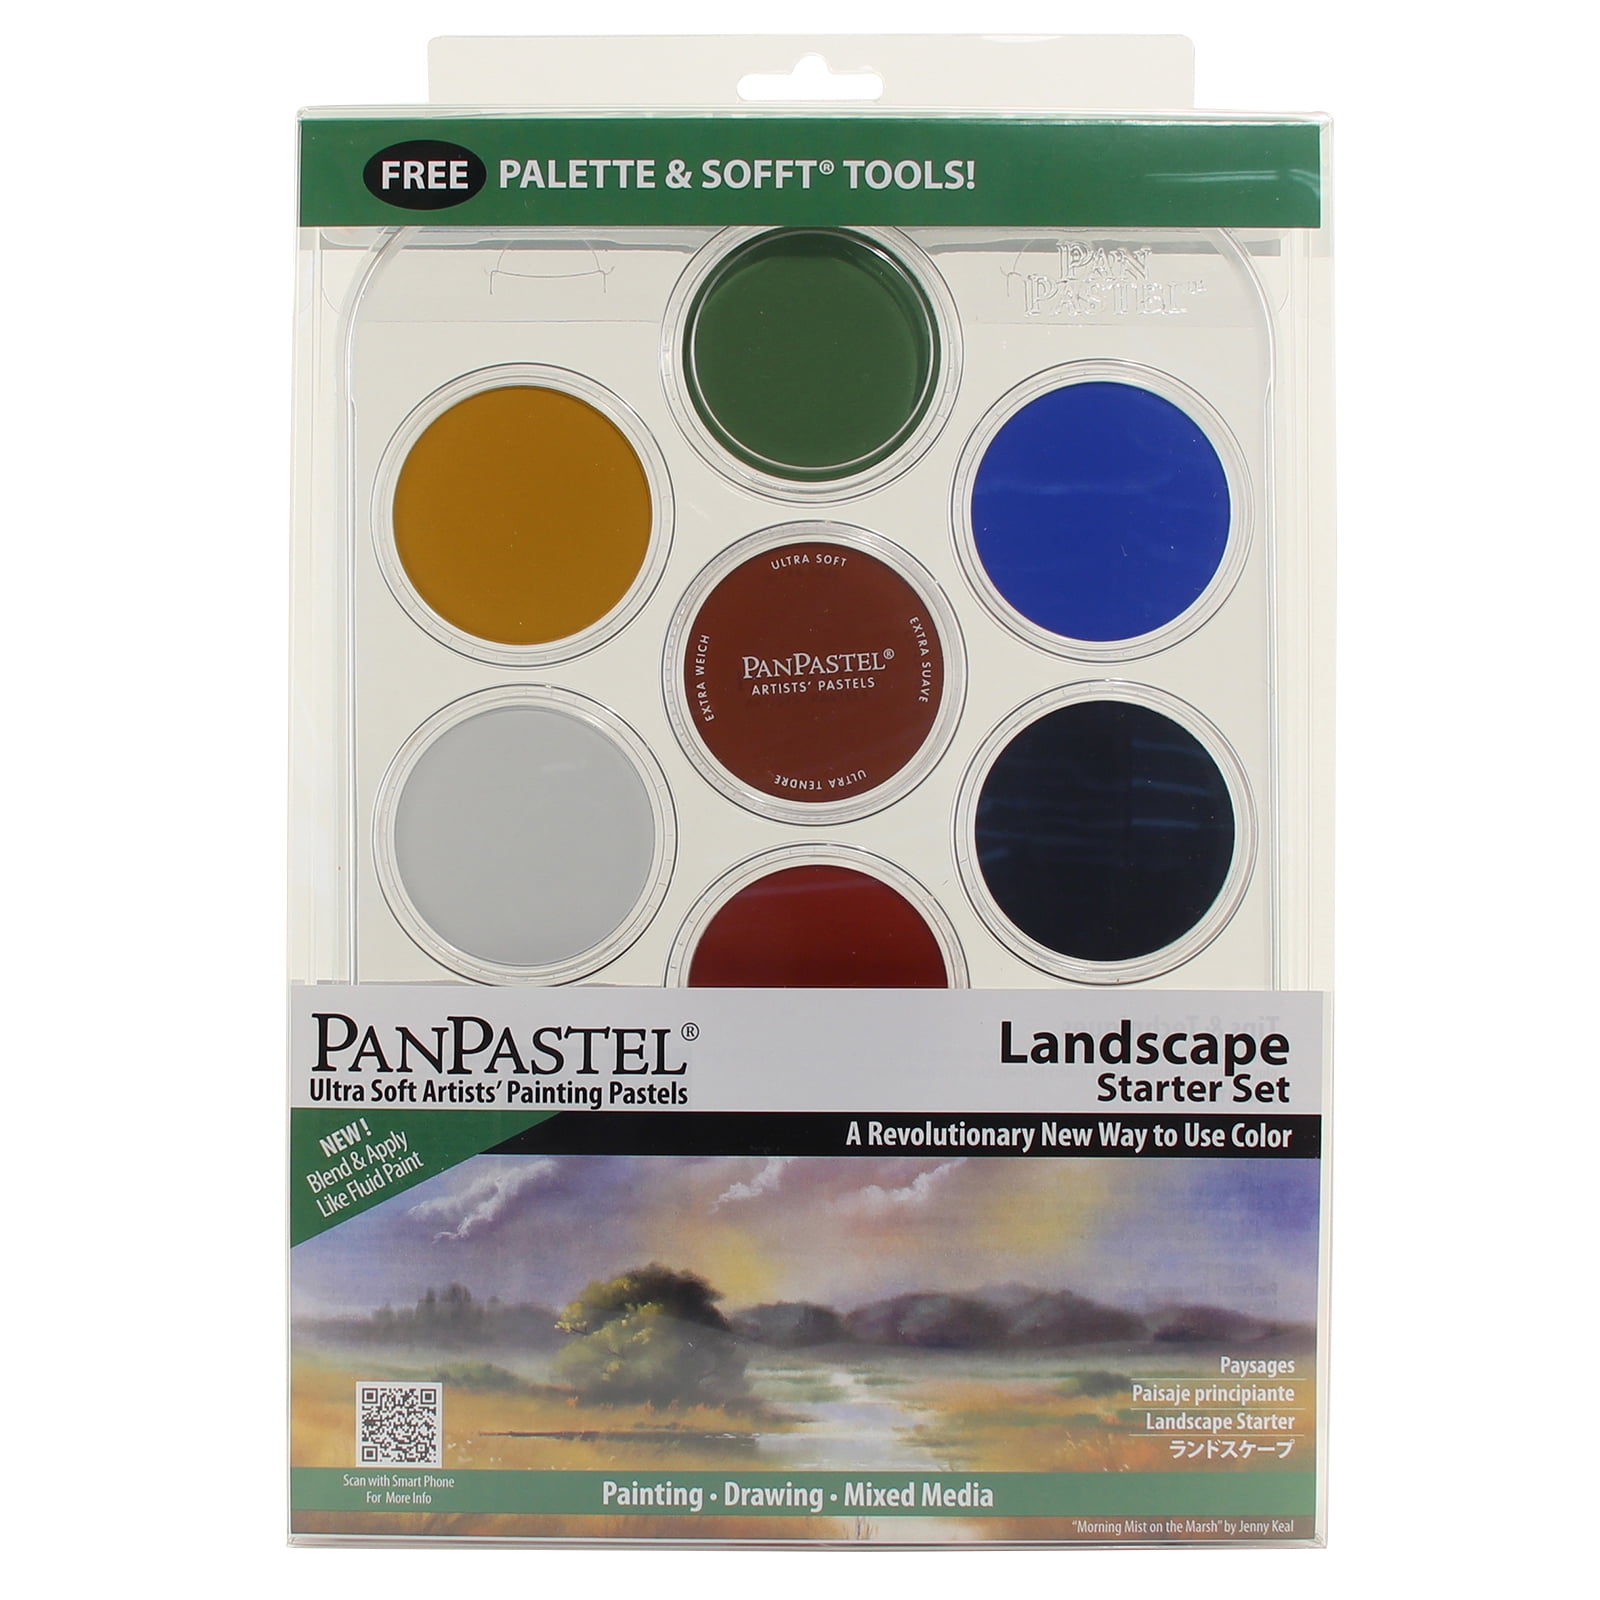 How to Use PanPastels with Traditional Soft Pastels